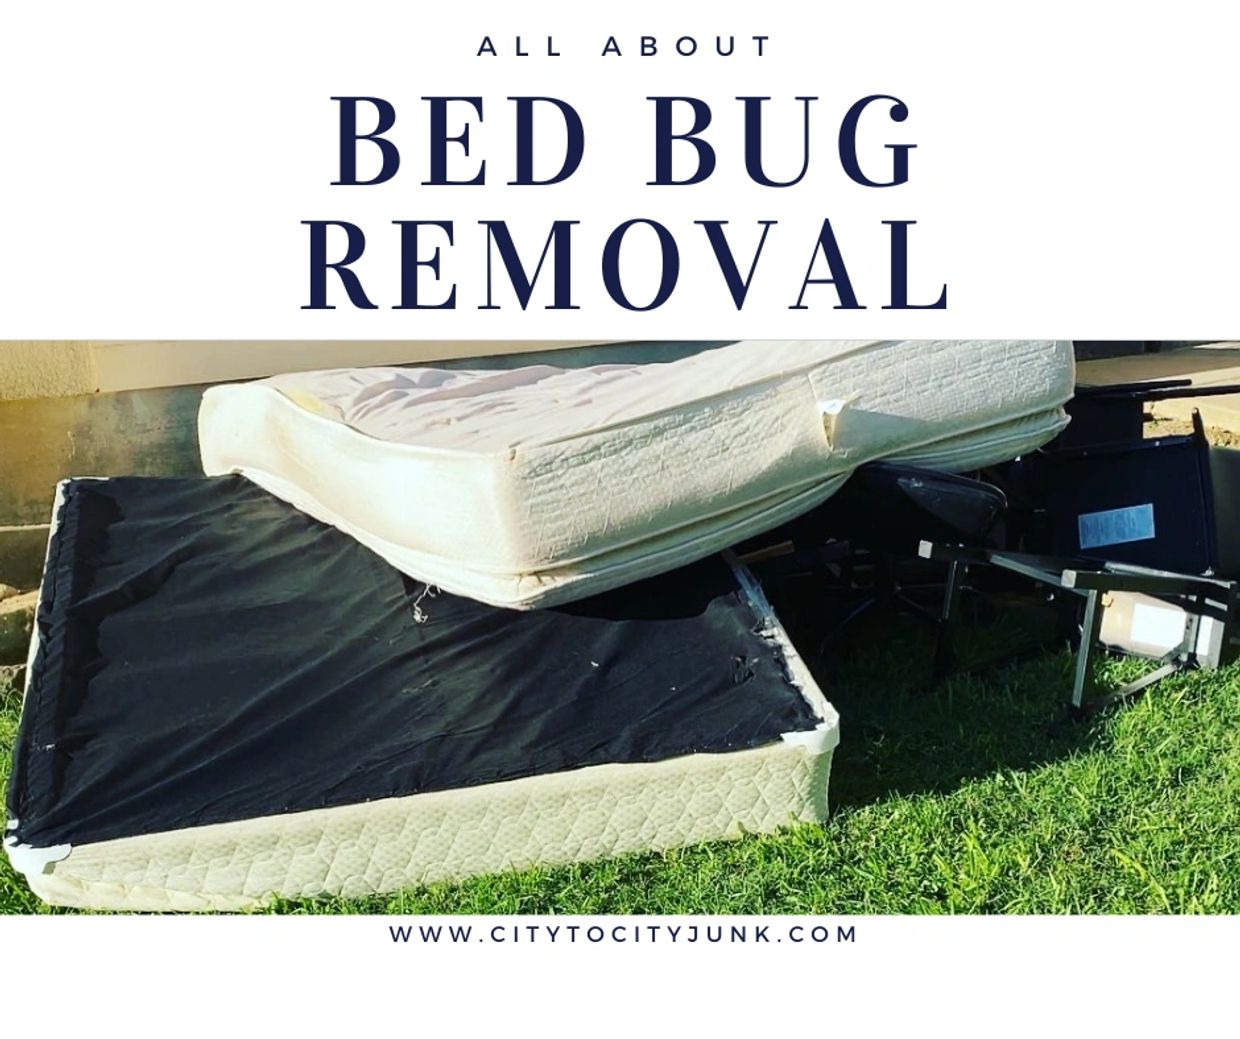 curb side bed bug furniture removal in fort worth texas, affordable option for waste removal